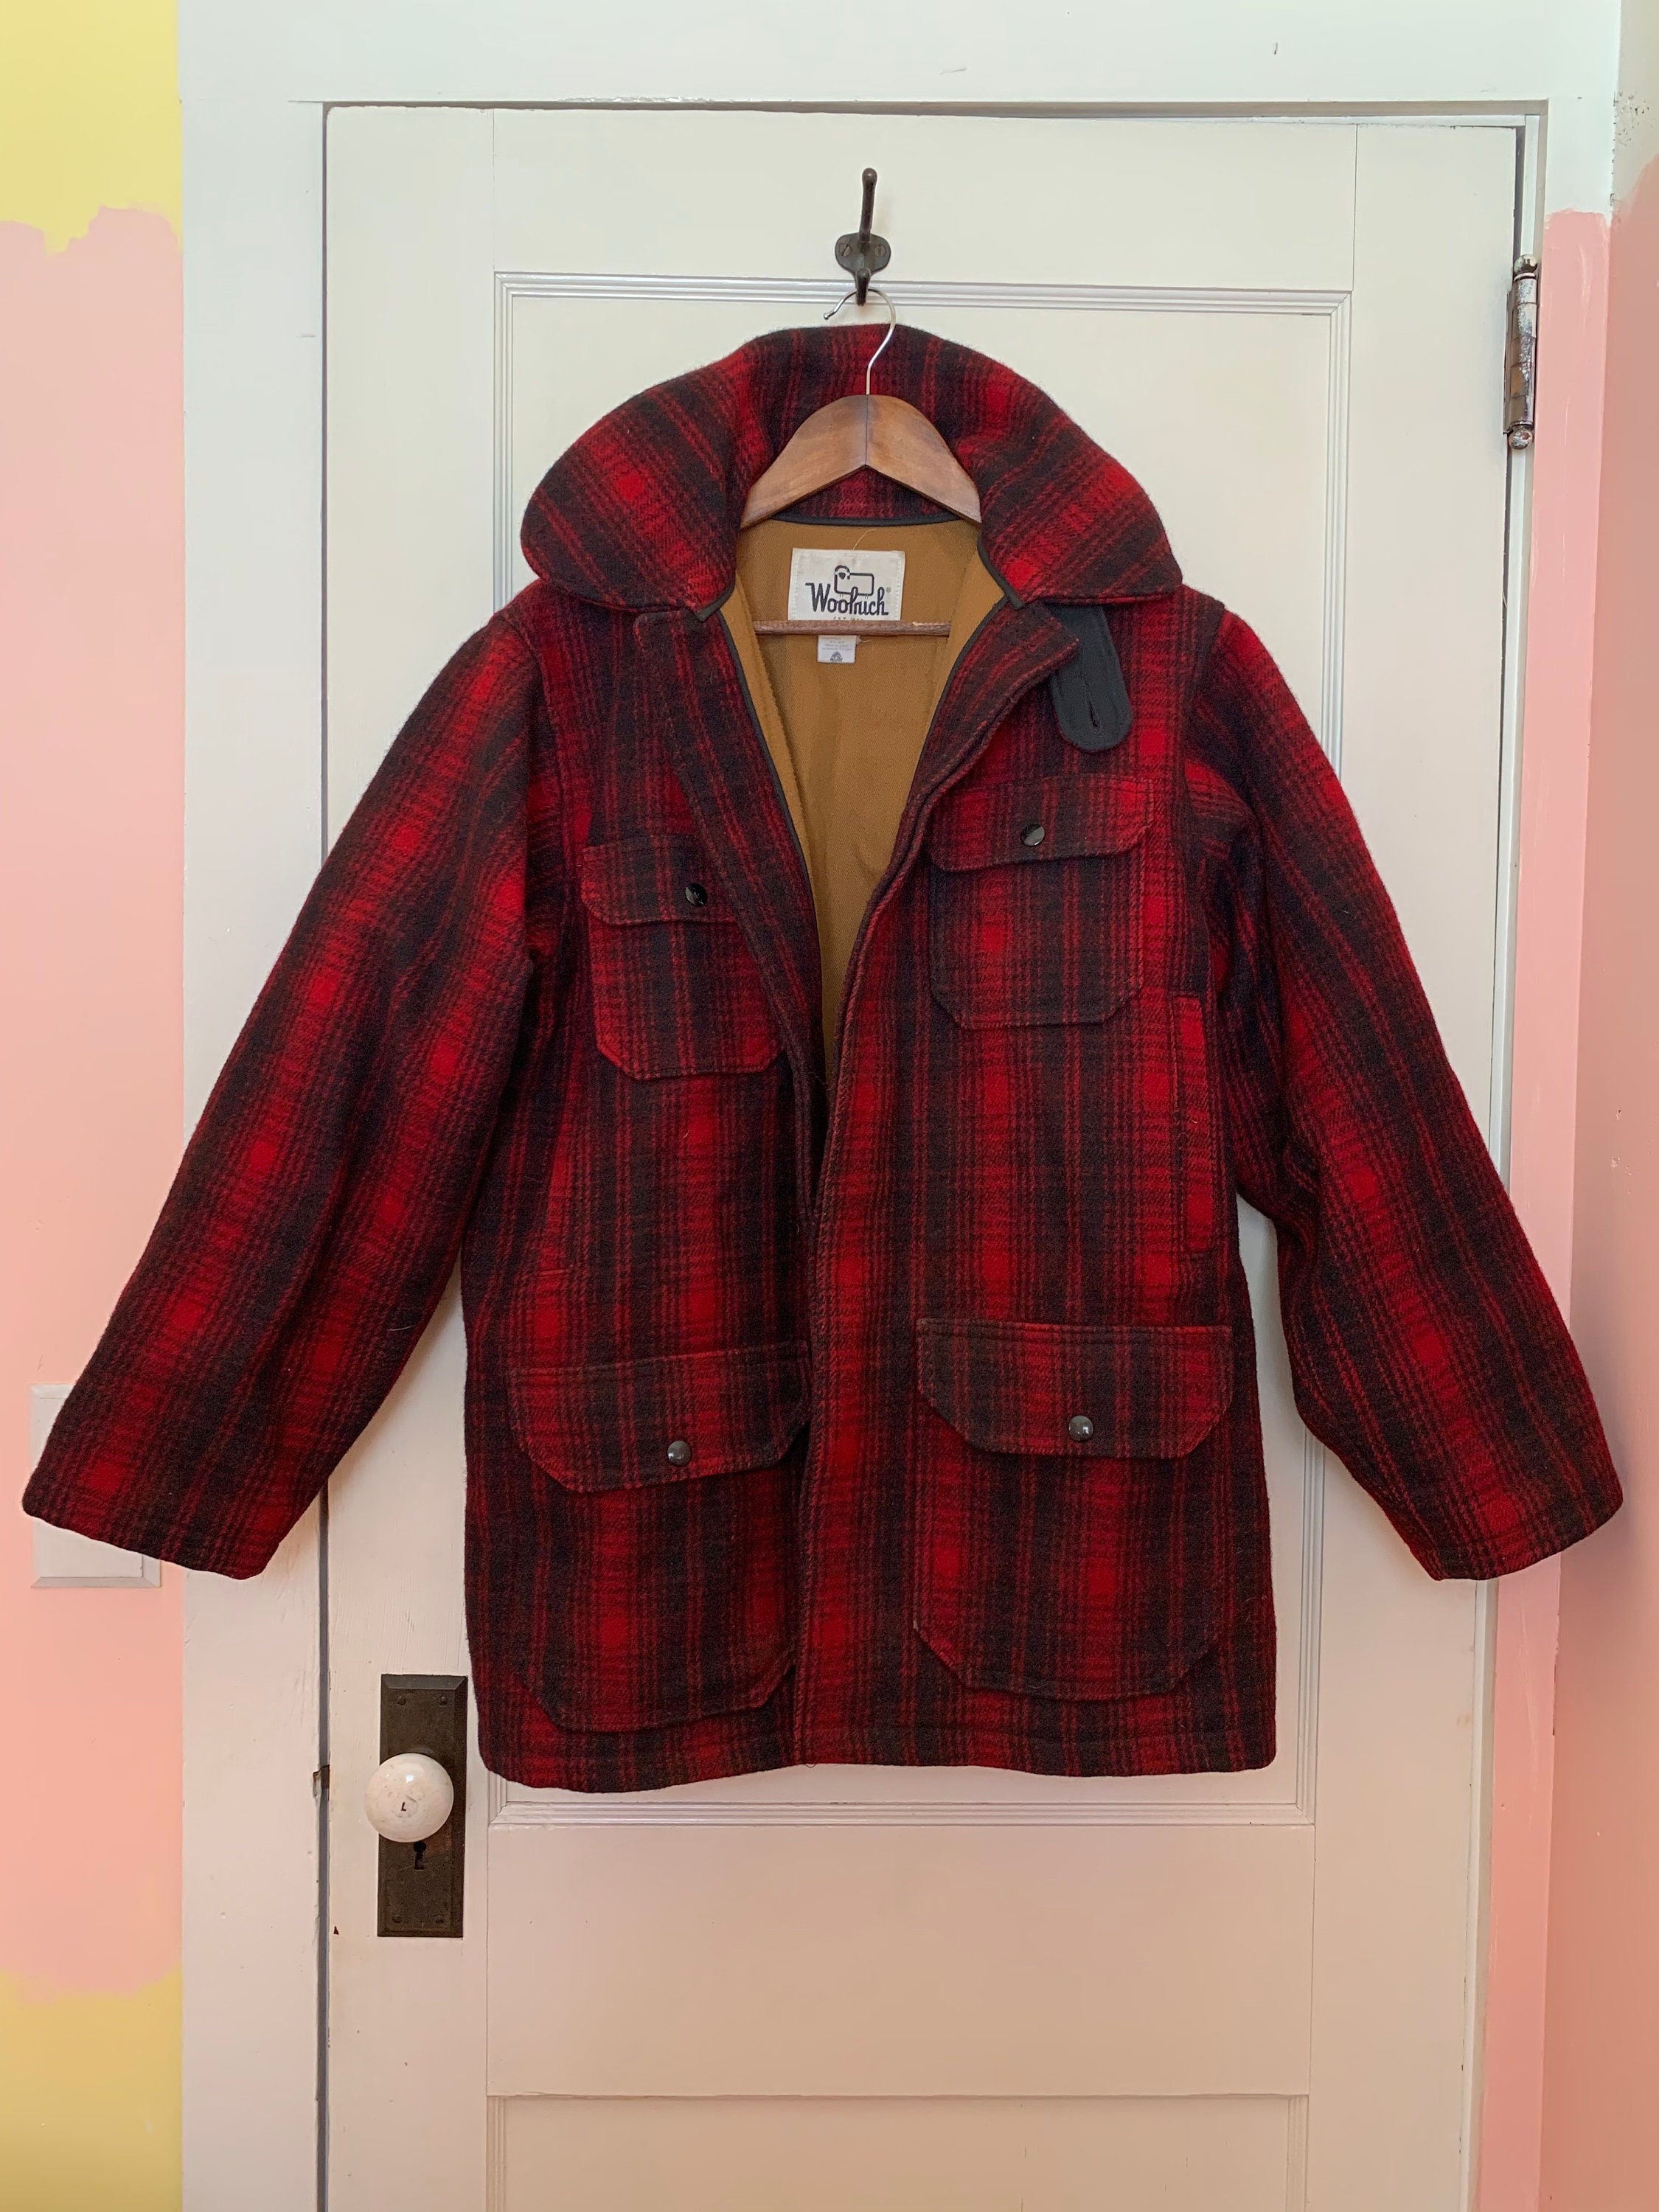 Authentic Vintage Red Plaid Woolrich Fall Winter Jacket